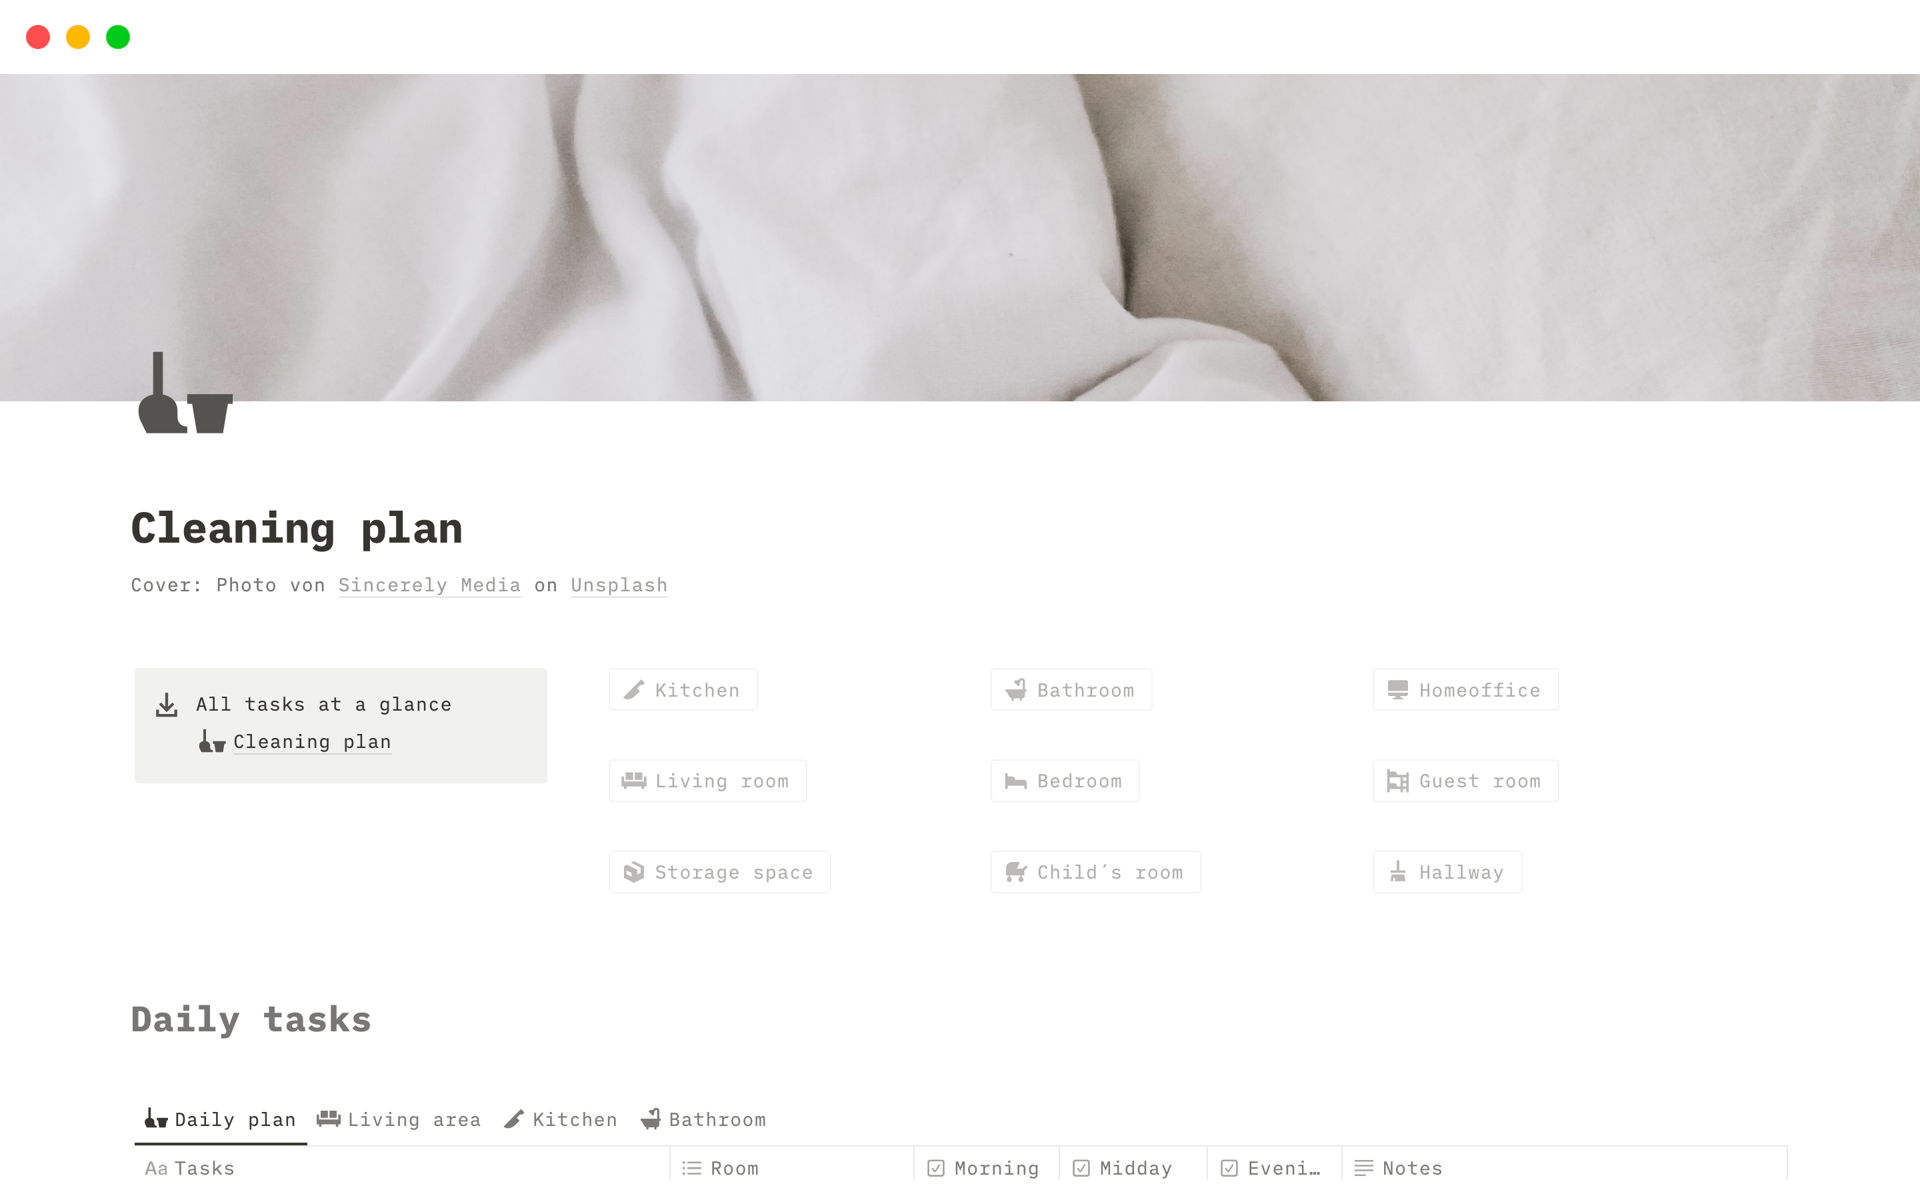 This Notion Template “Cleaning plan” offers you an organized solution for managing your cleaning tasks.